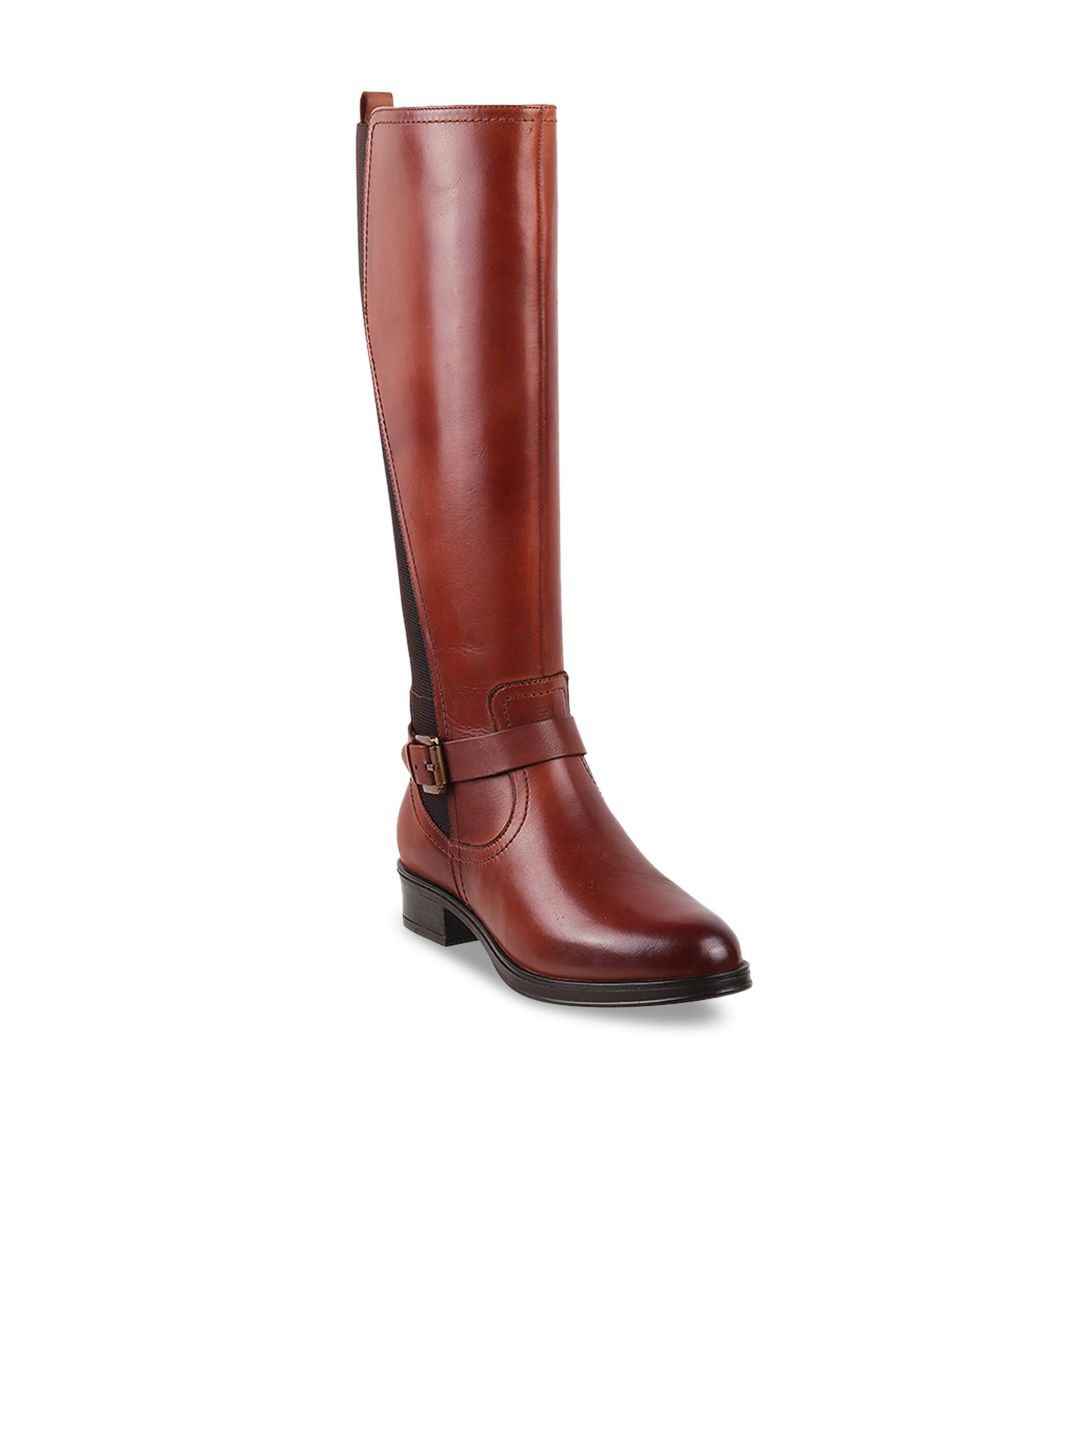 Metro Tan Block Heeled Boots with Buckles Price in India